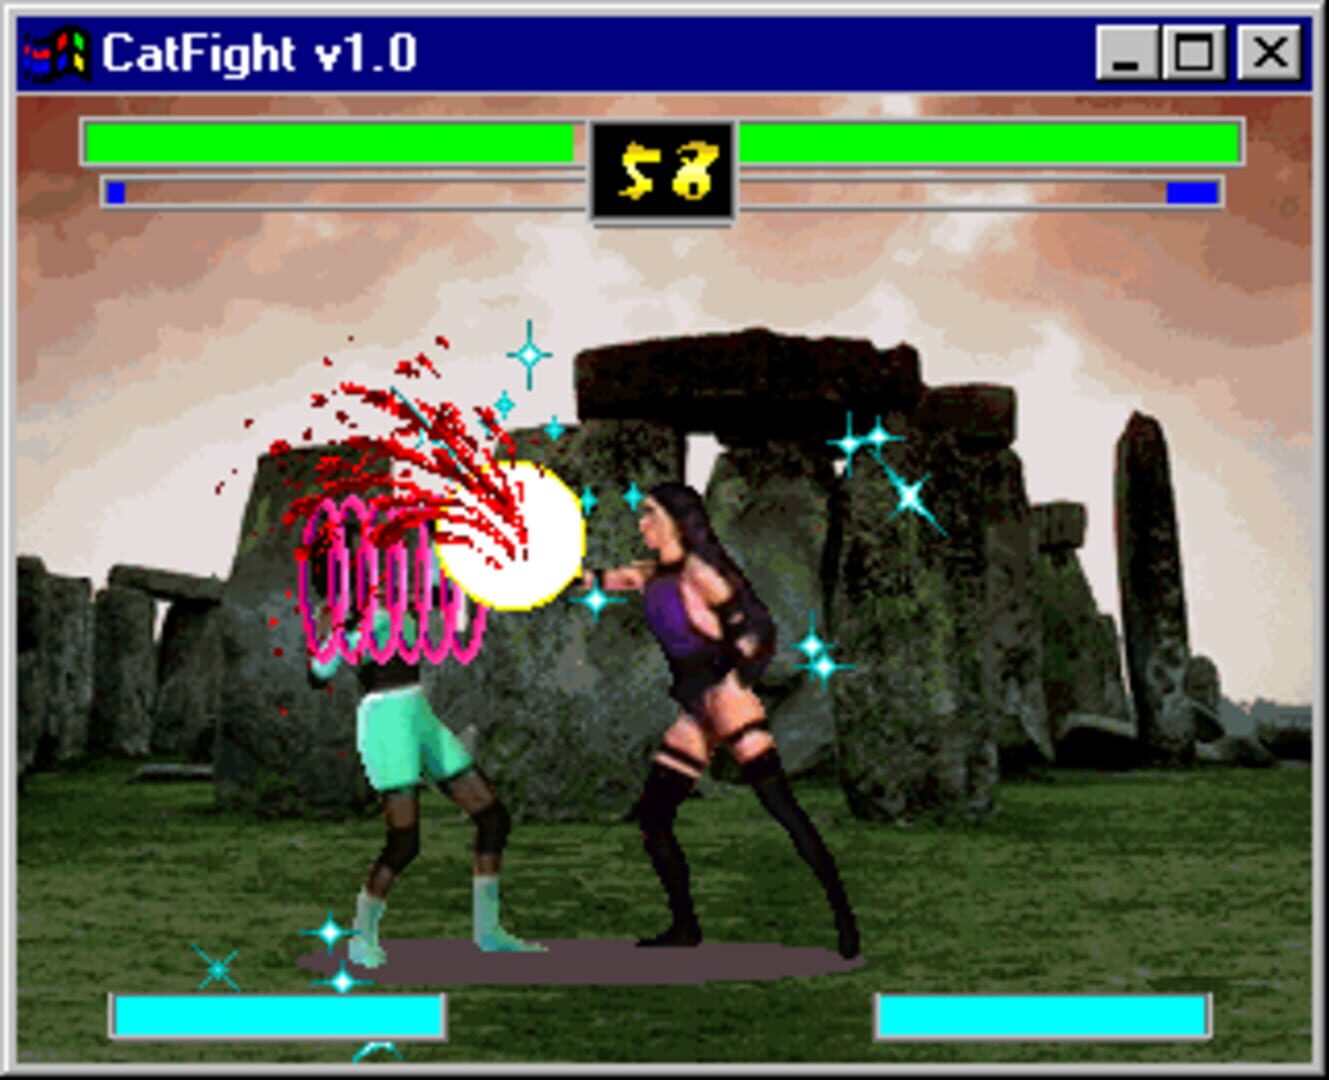 CatFight: The Ultimate Female Fighting Game Image